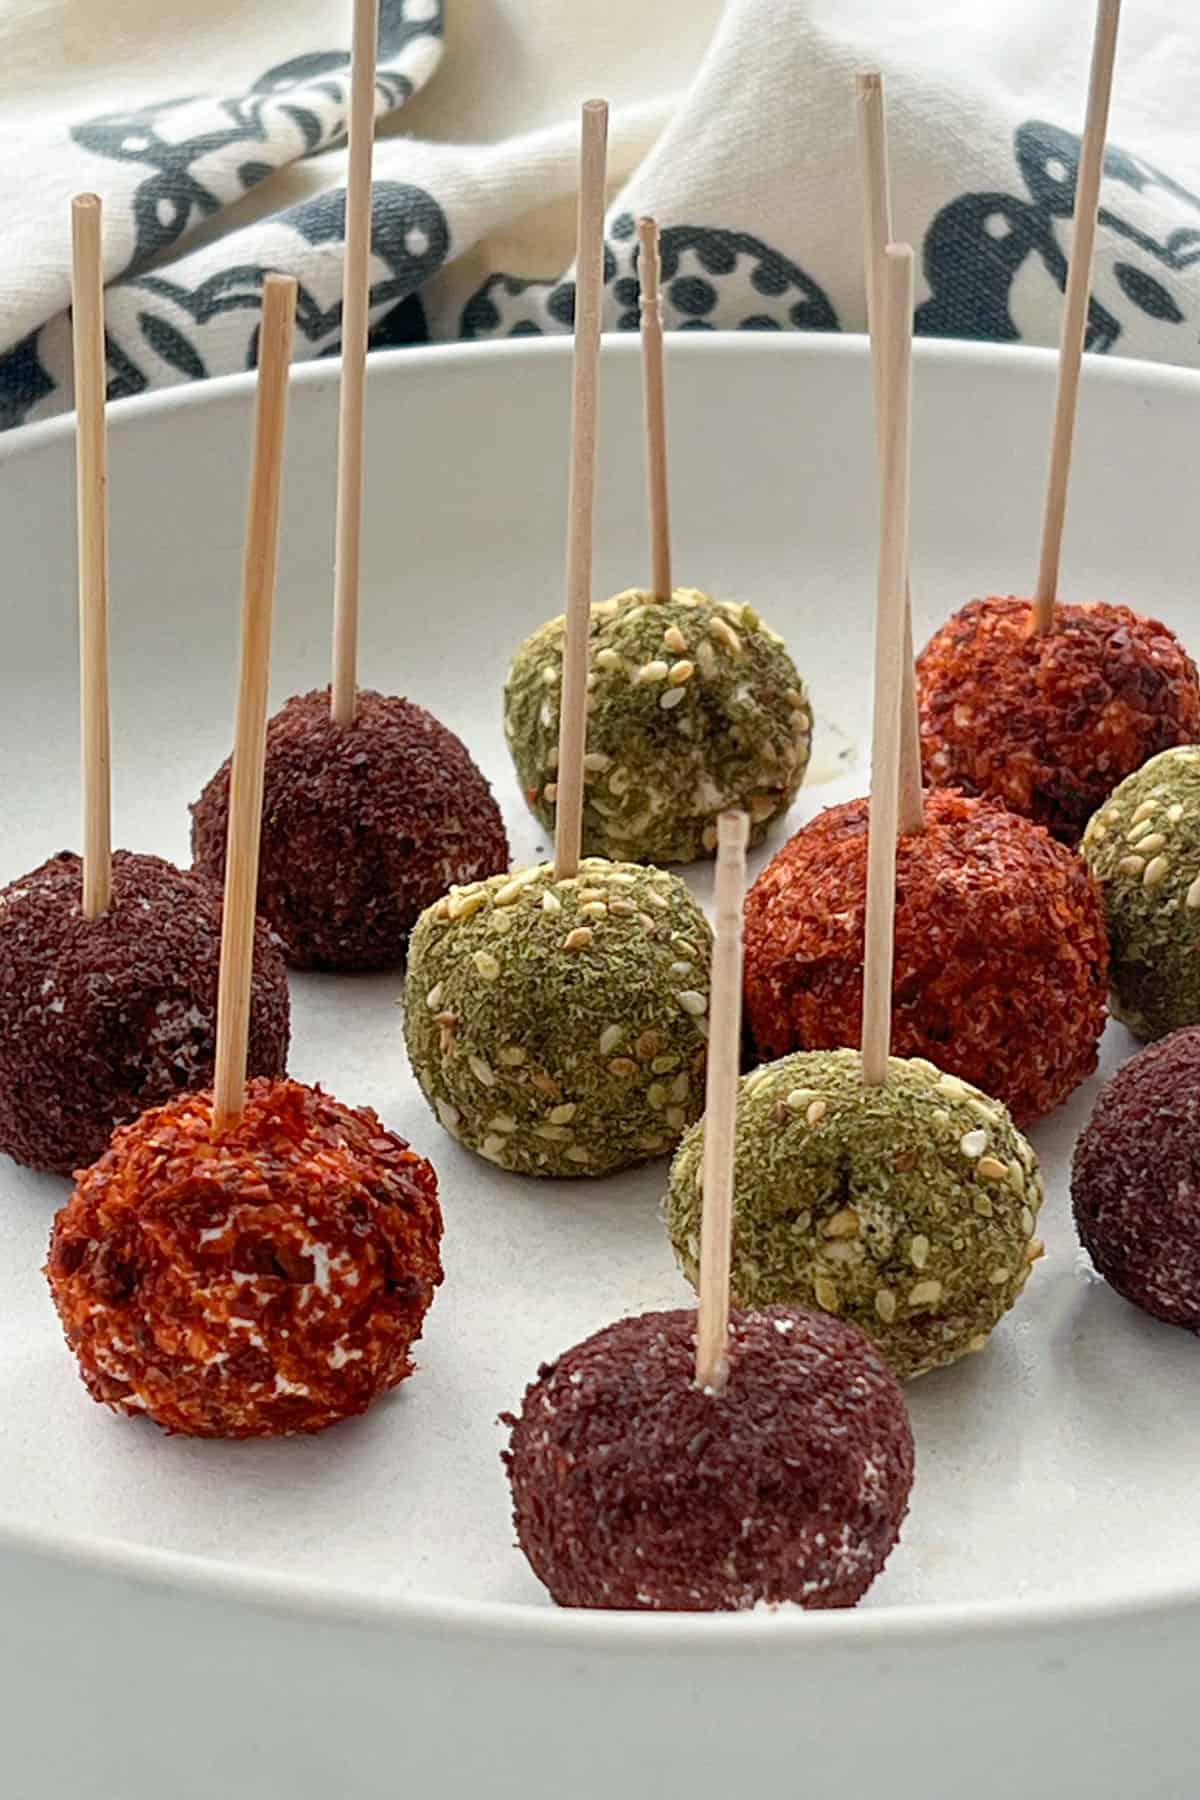 balls of labneh coated in various spices with toothpicks in them